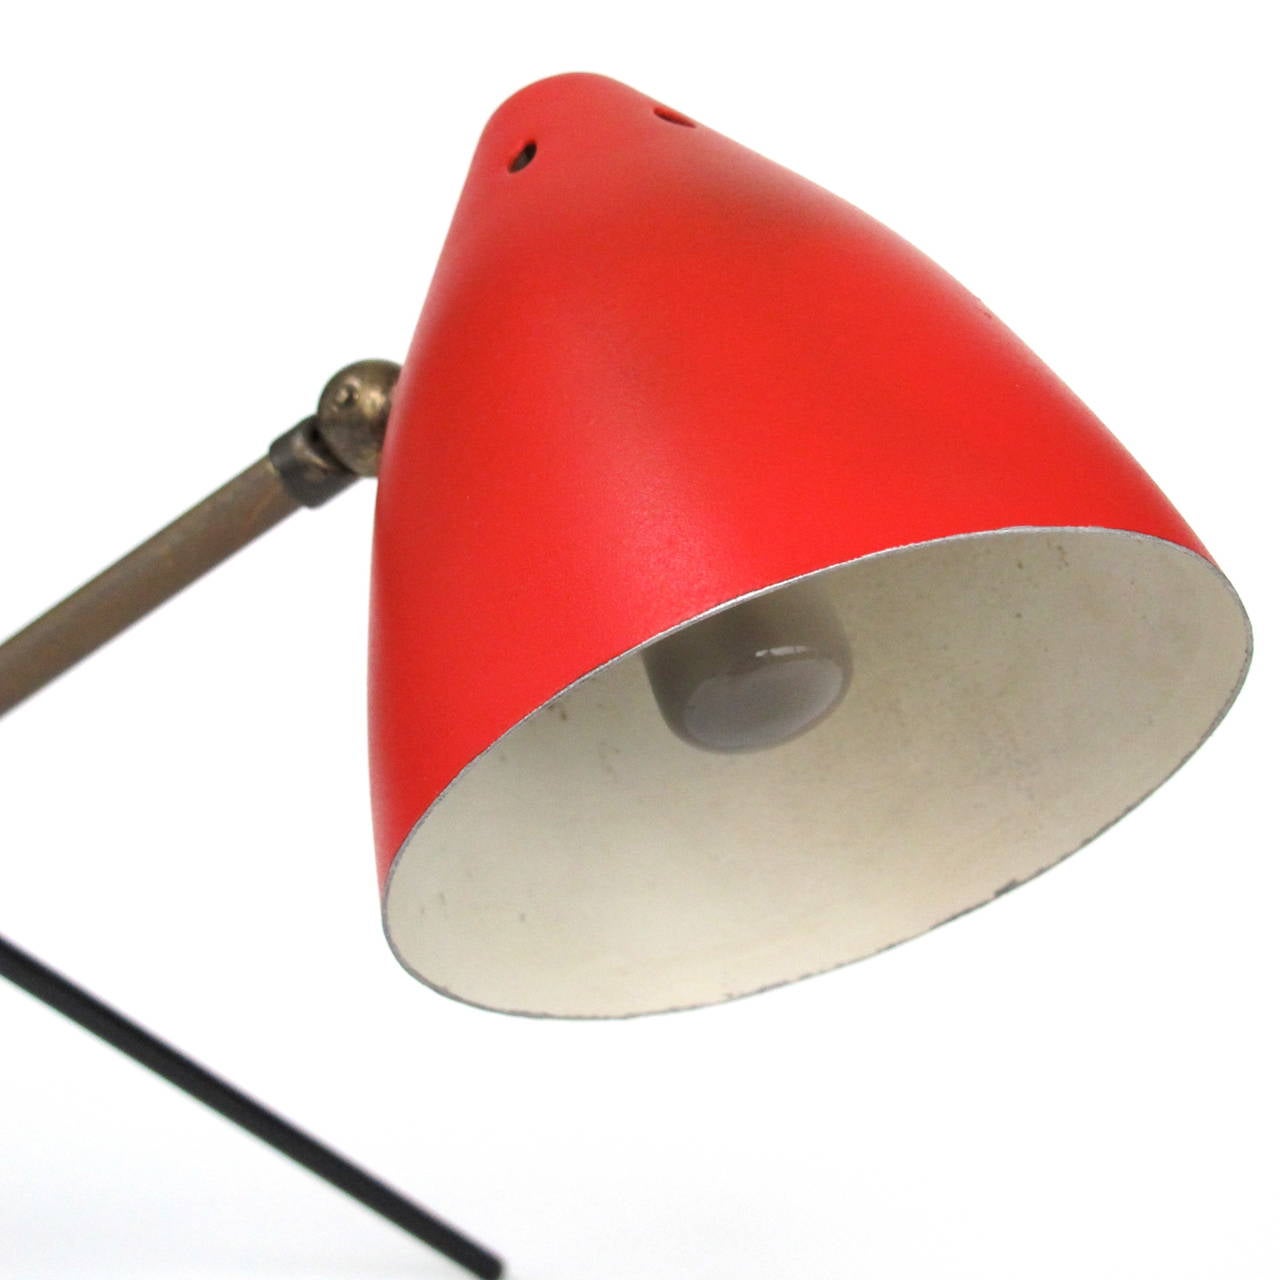 Enameled 'Pinocchio' Table or Wall Lamp by Herman Busquet for Hala Zeist, 1956